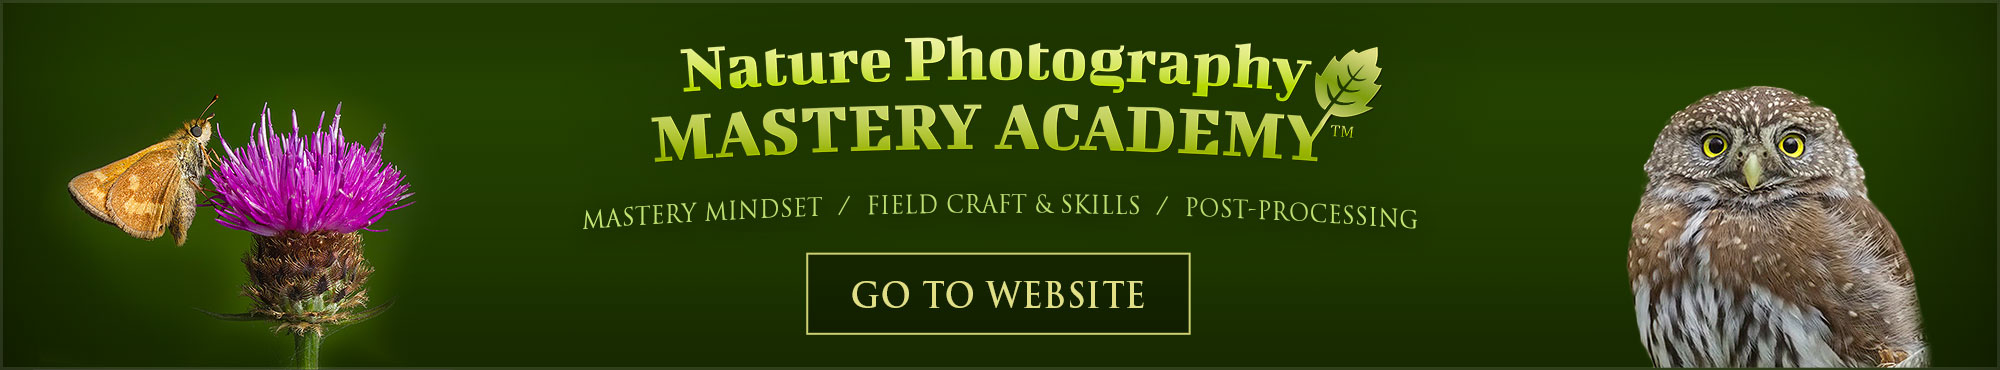 Nature Photography Mastery Academy - Go to Website